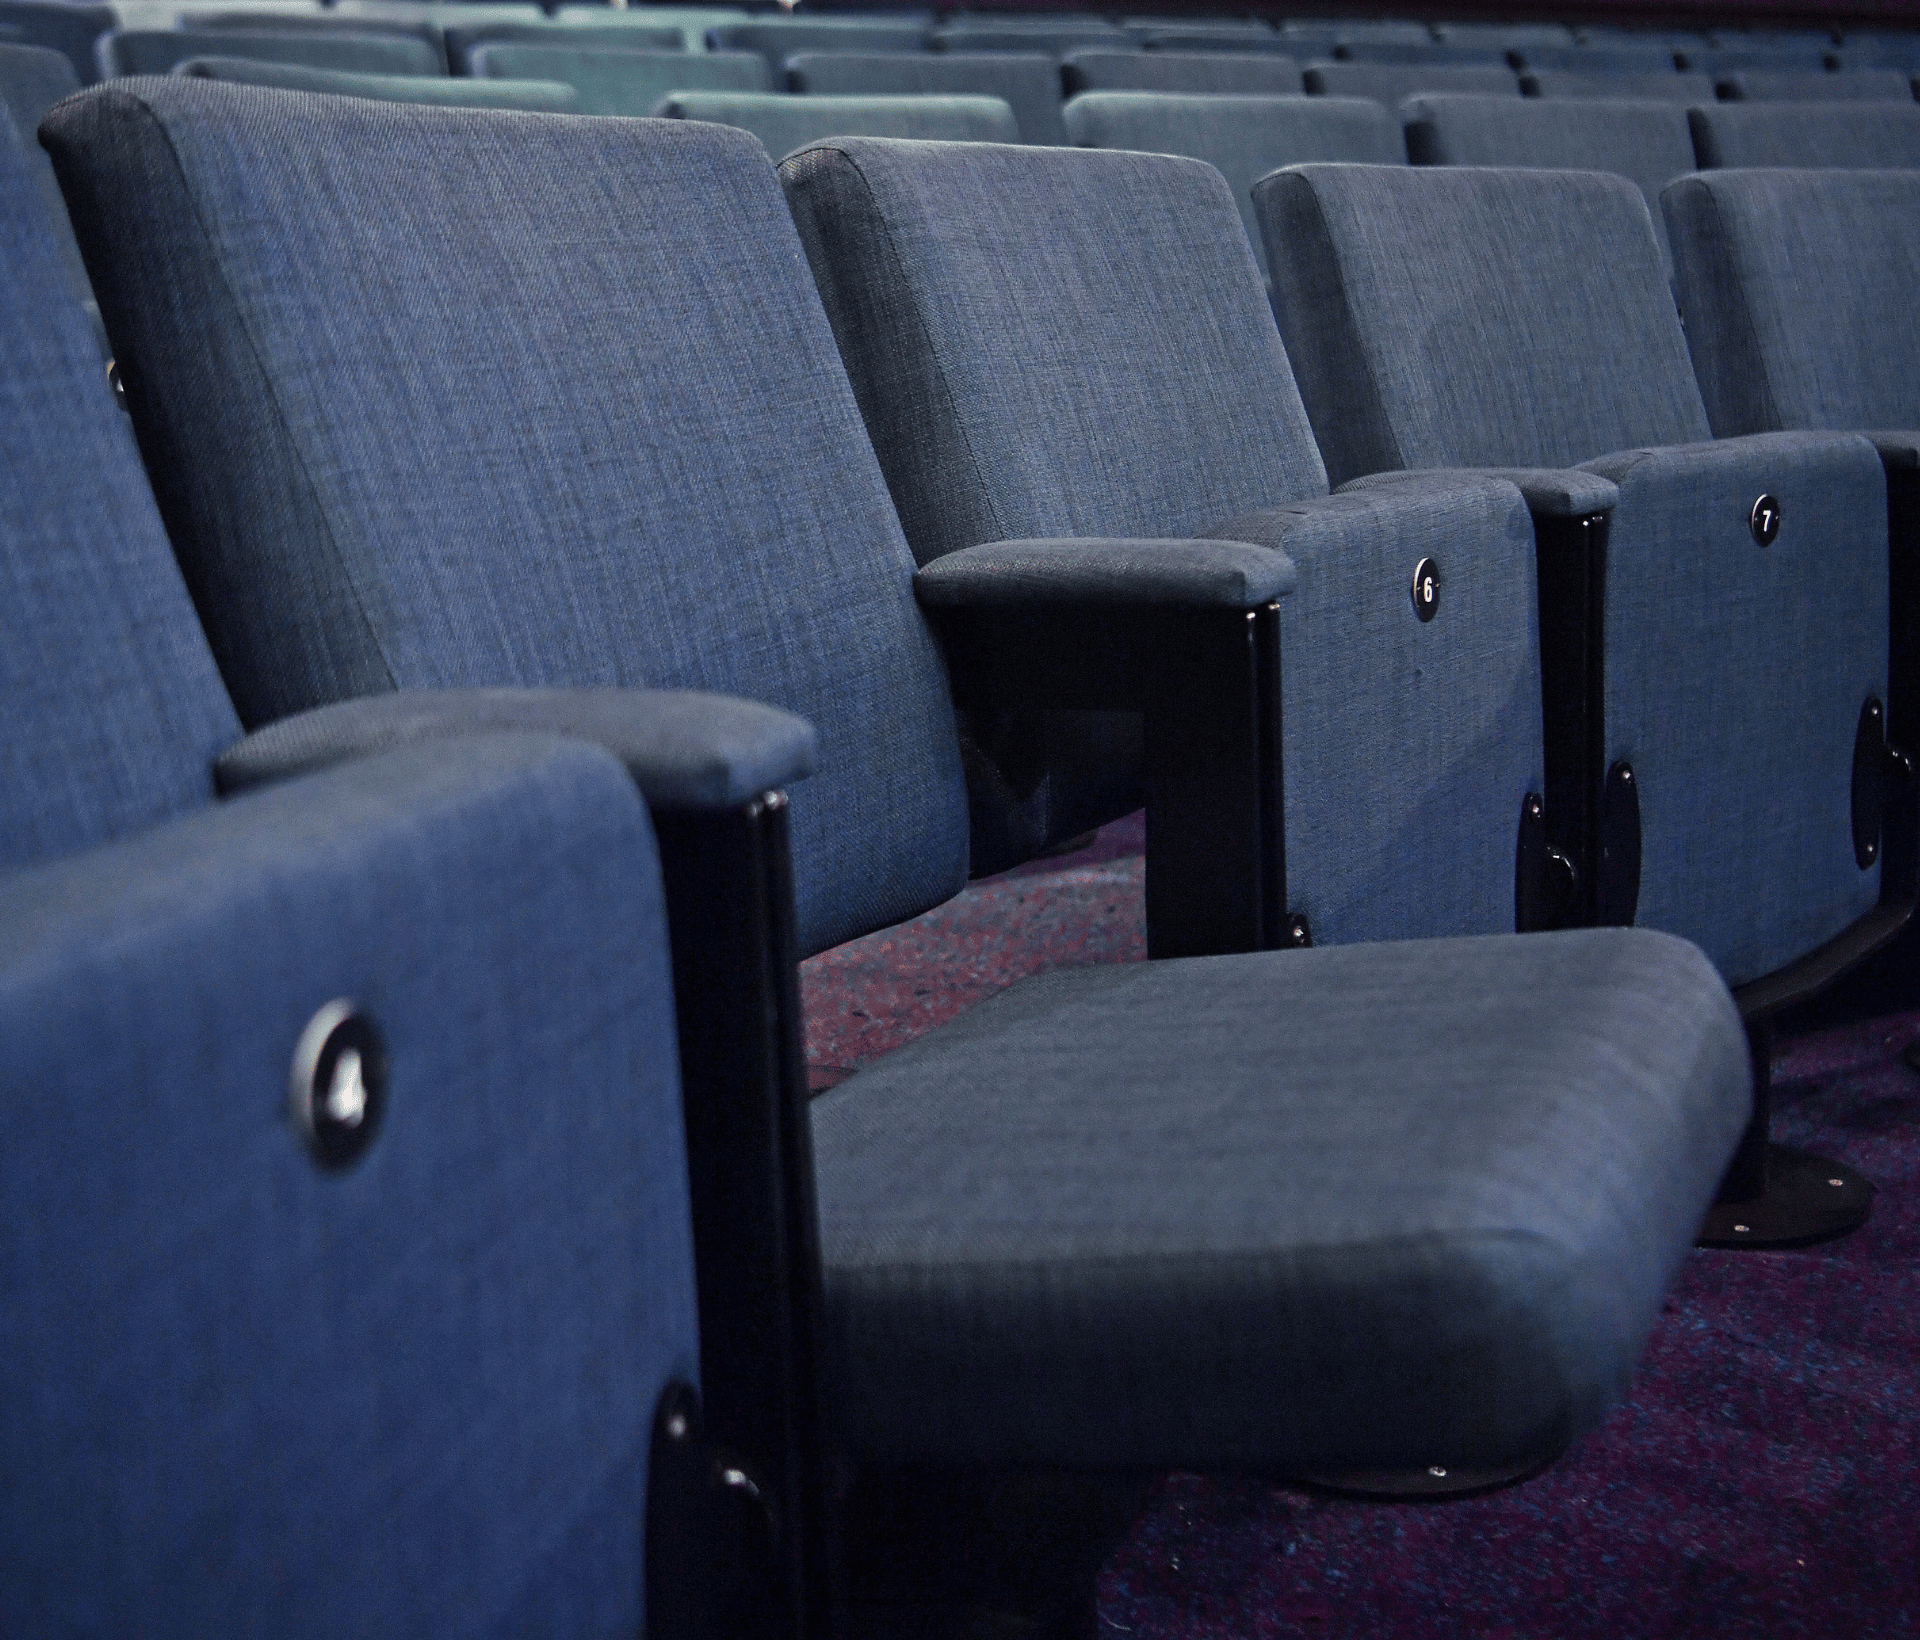 A row of blue auditorium seating in an auditorium.